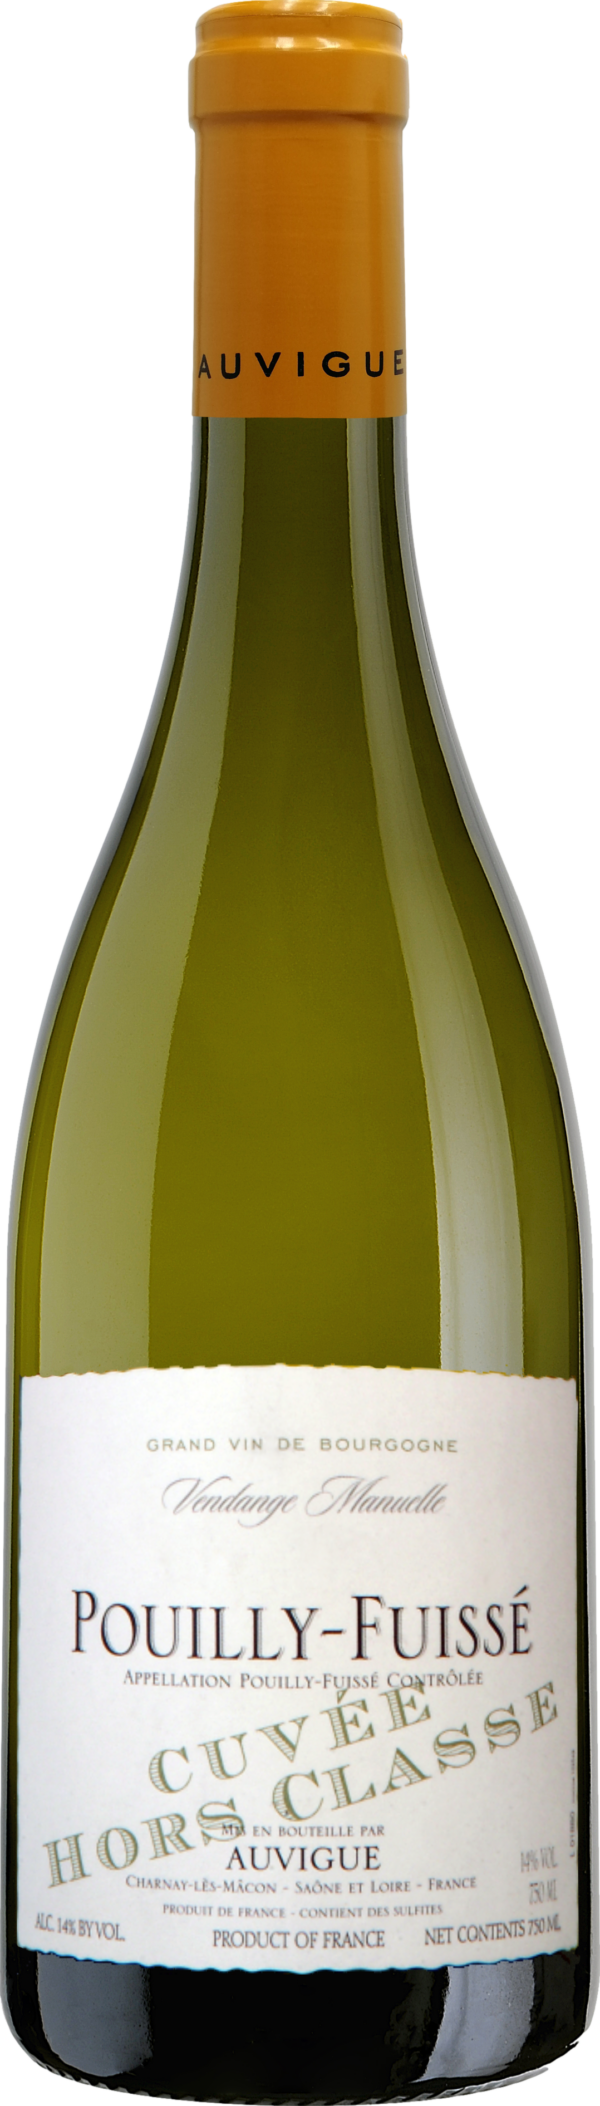 Product image of Auvigue Pouilly-Fuisse Hors Classe 2021 from 8wines